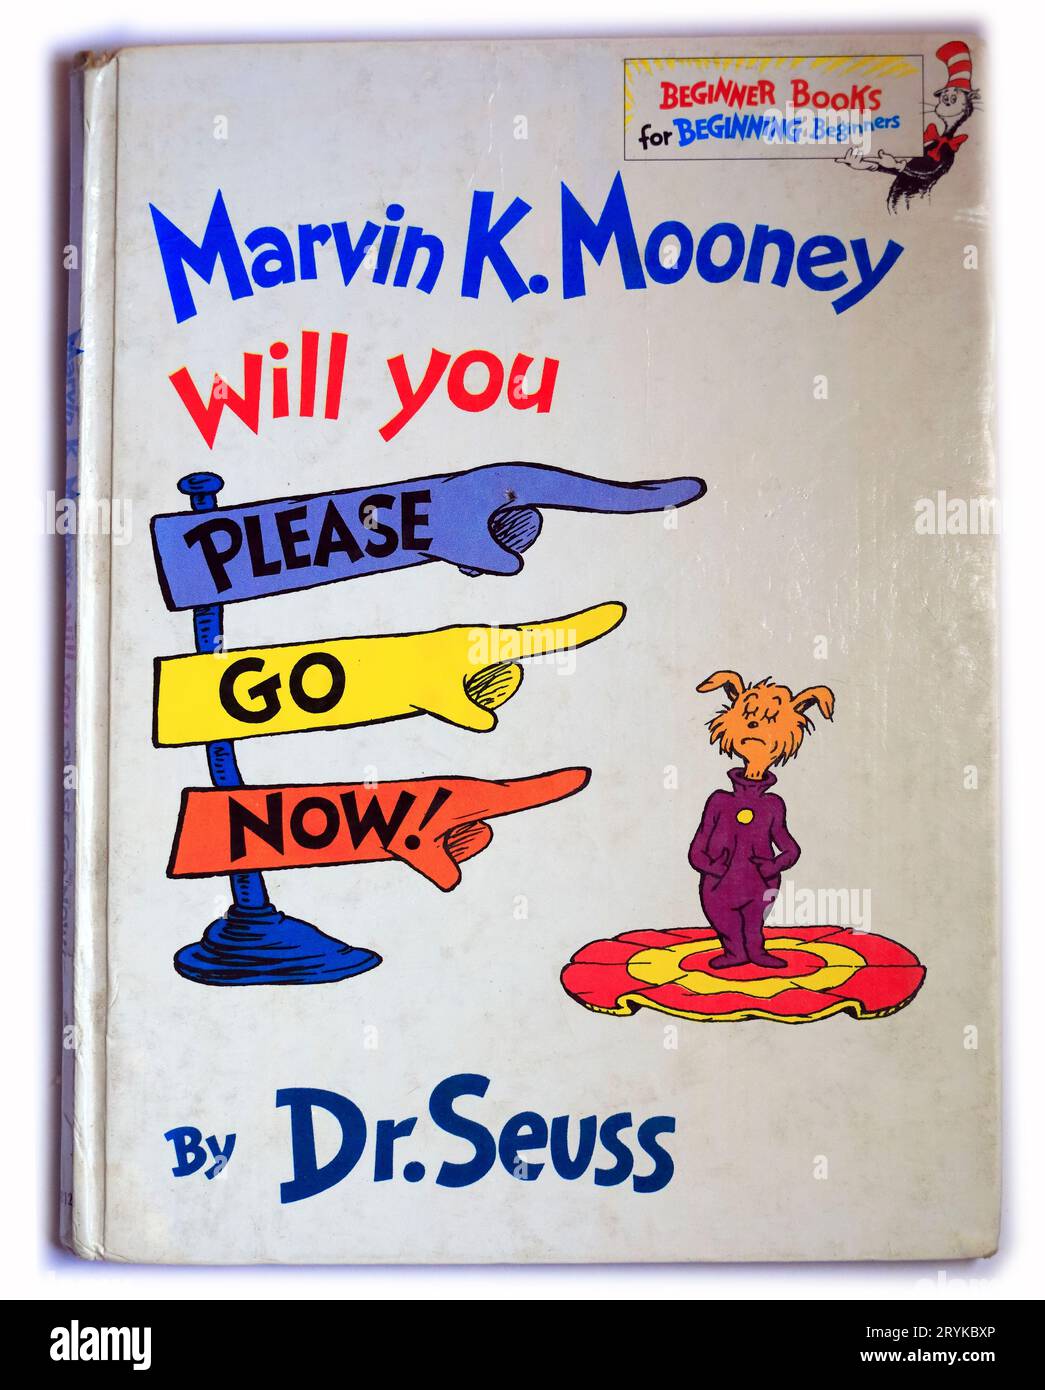 Dr Seuss - Marvin K. Mooney, Will You Please Go Now!!Book cover, studio ...